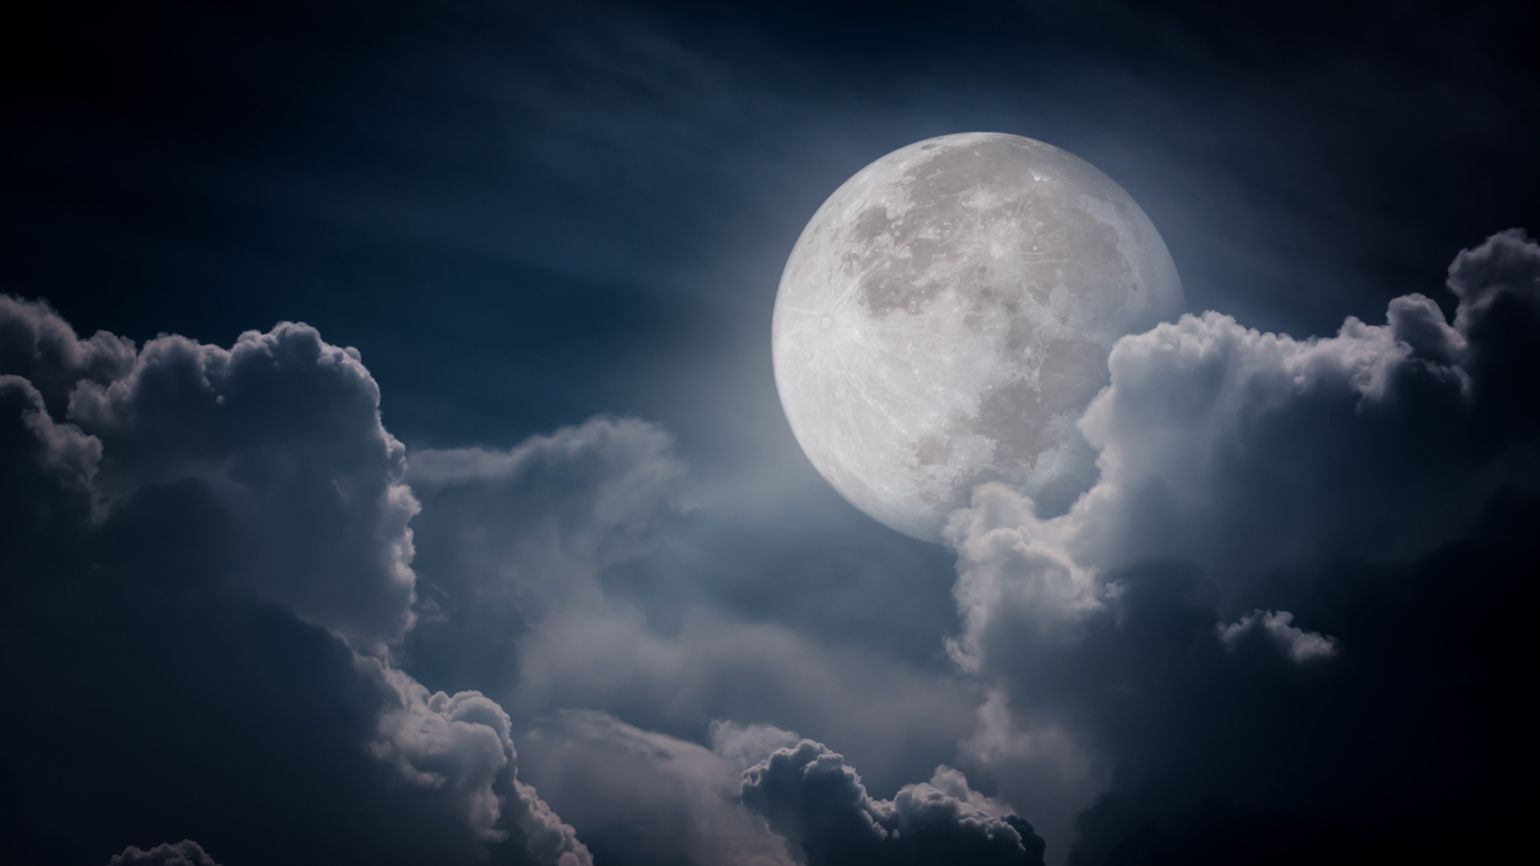 A full moon at night with clouds surrounding.